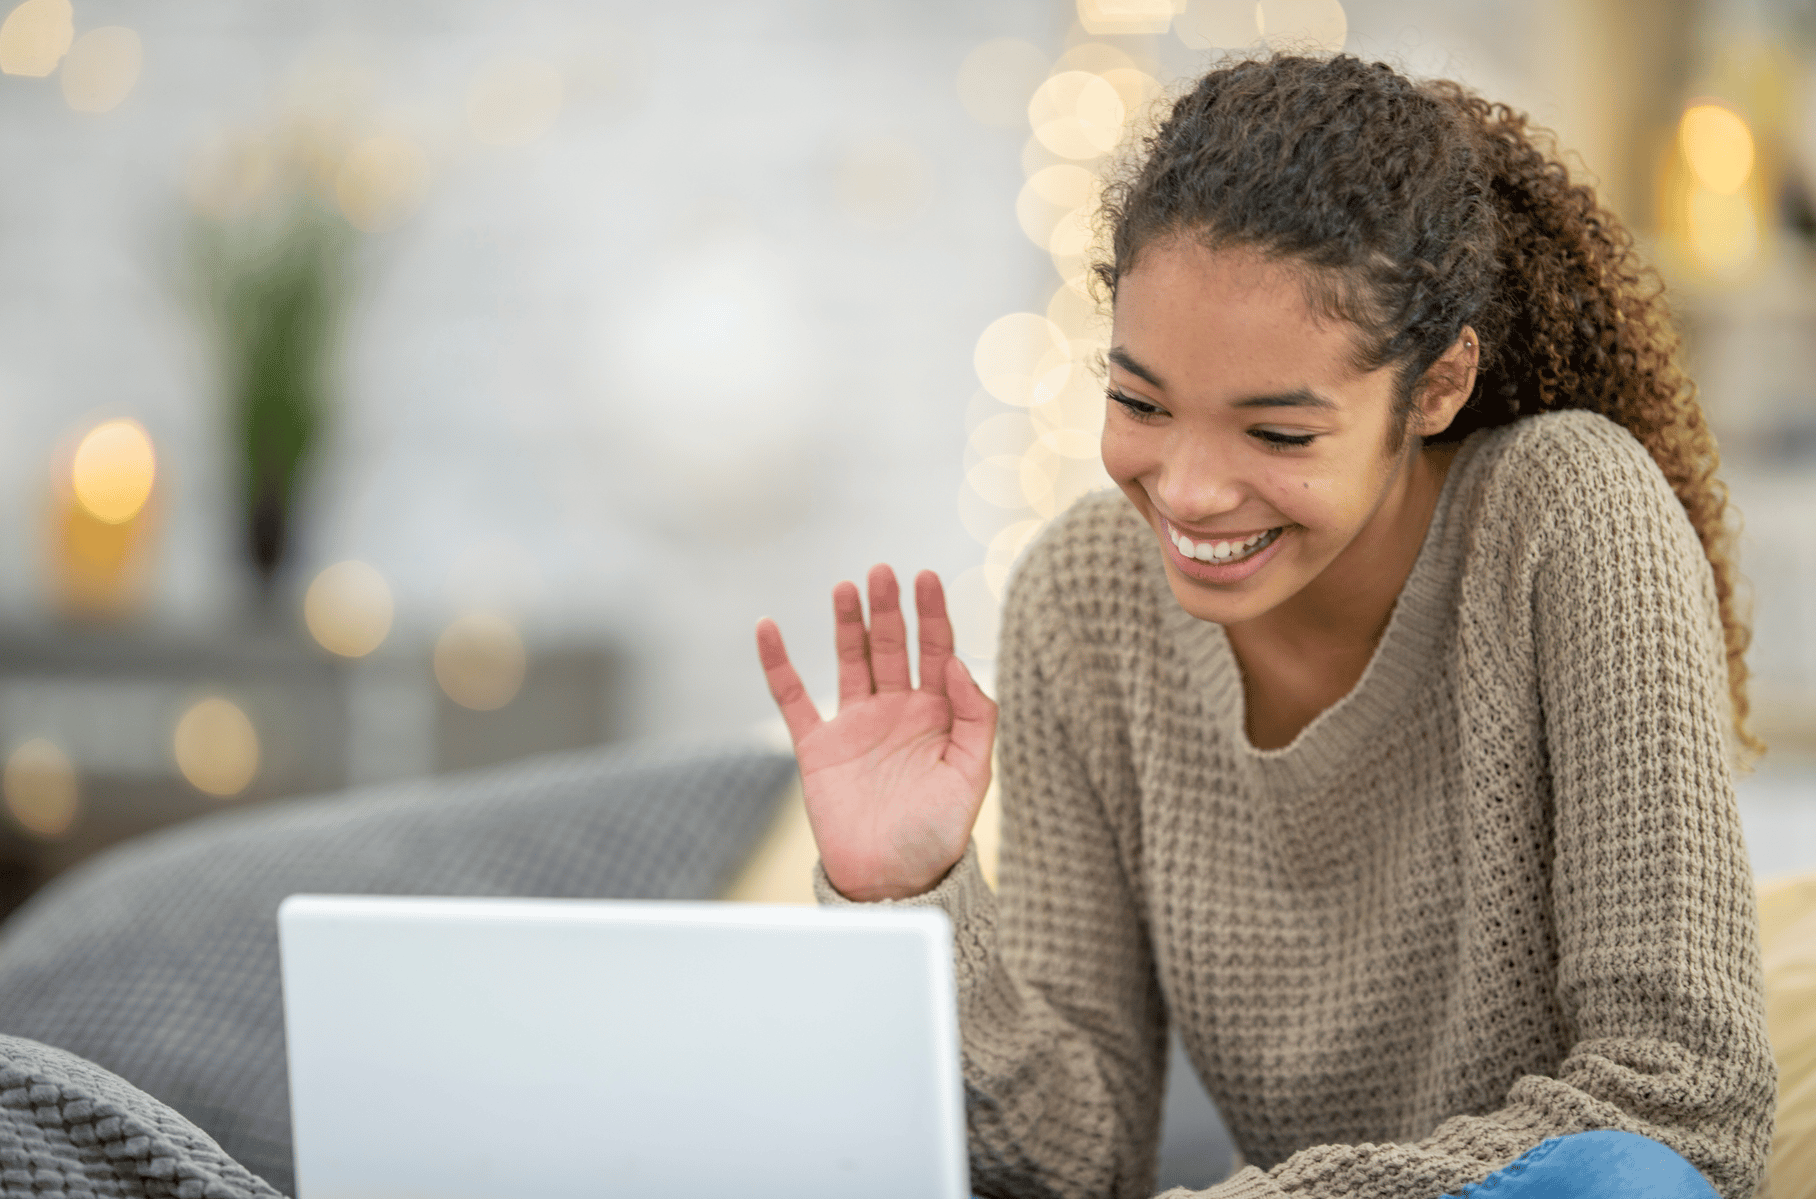 Female student waving and smiling at laptop